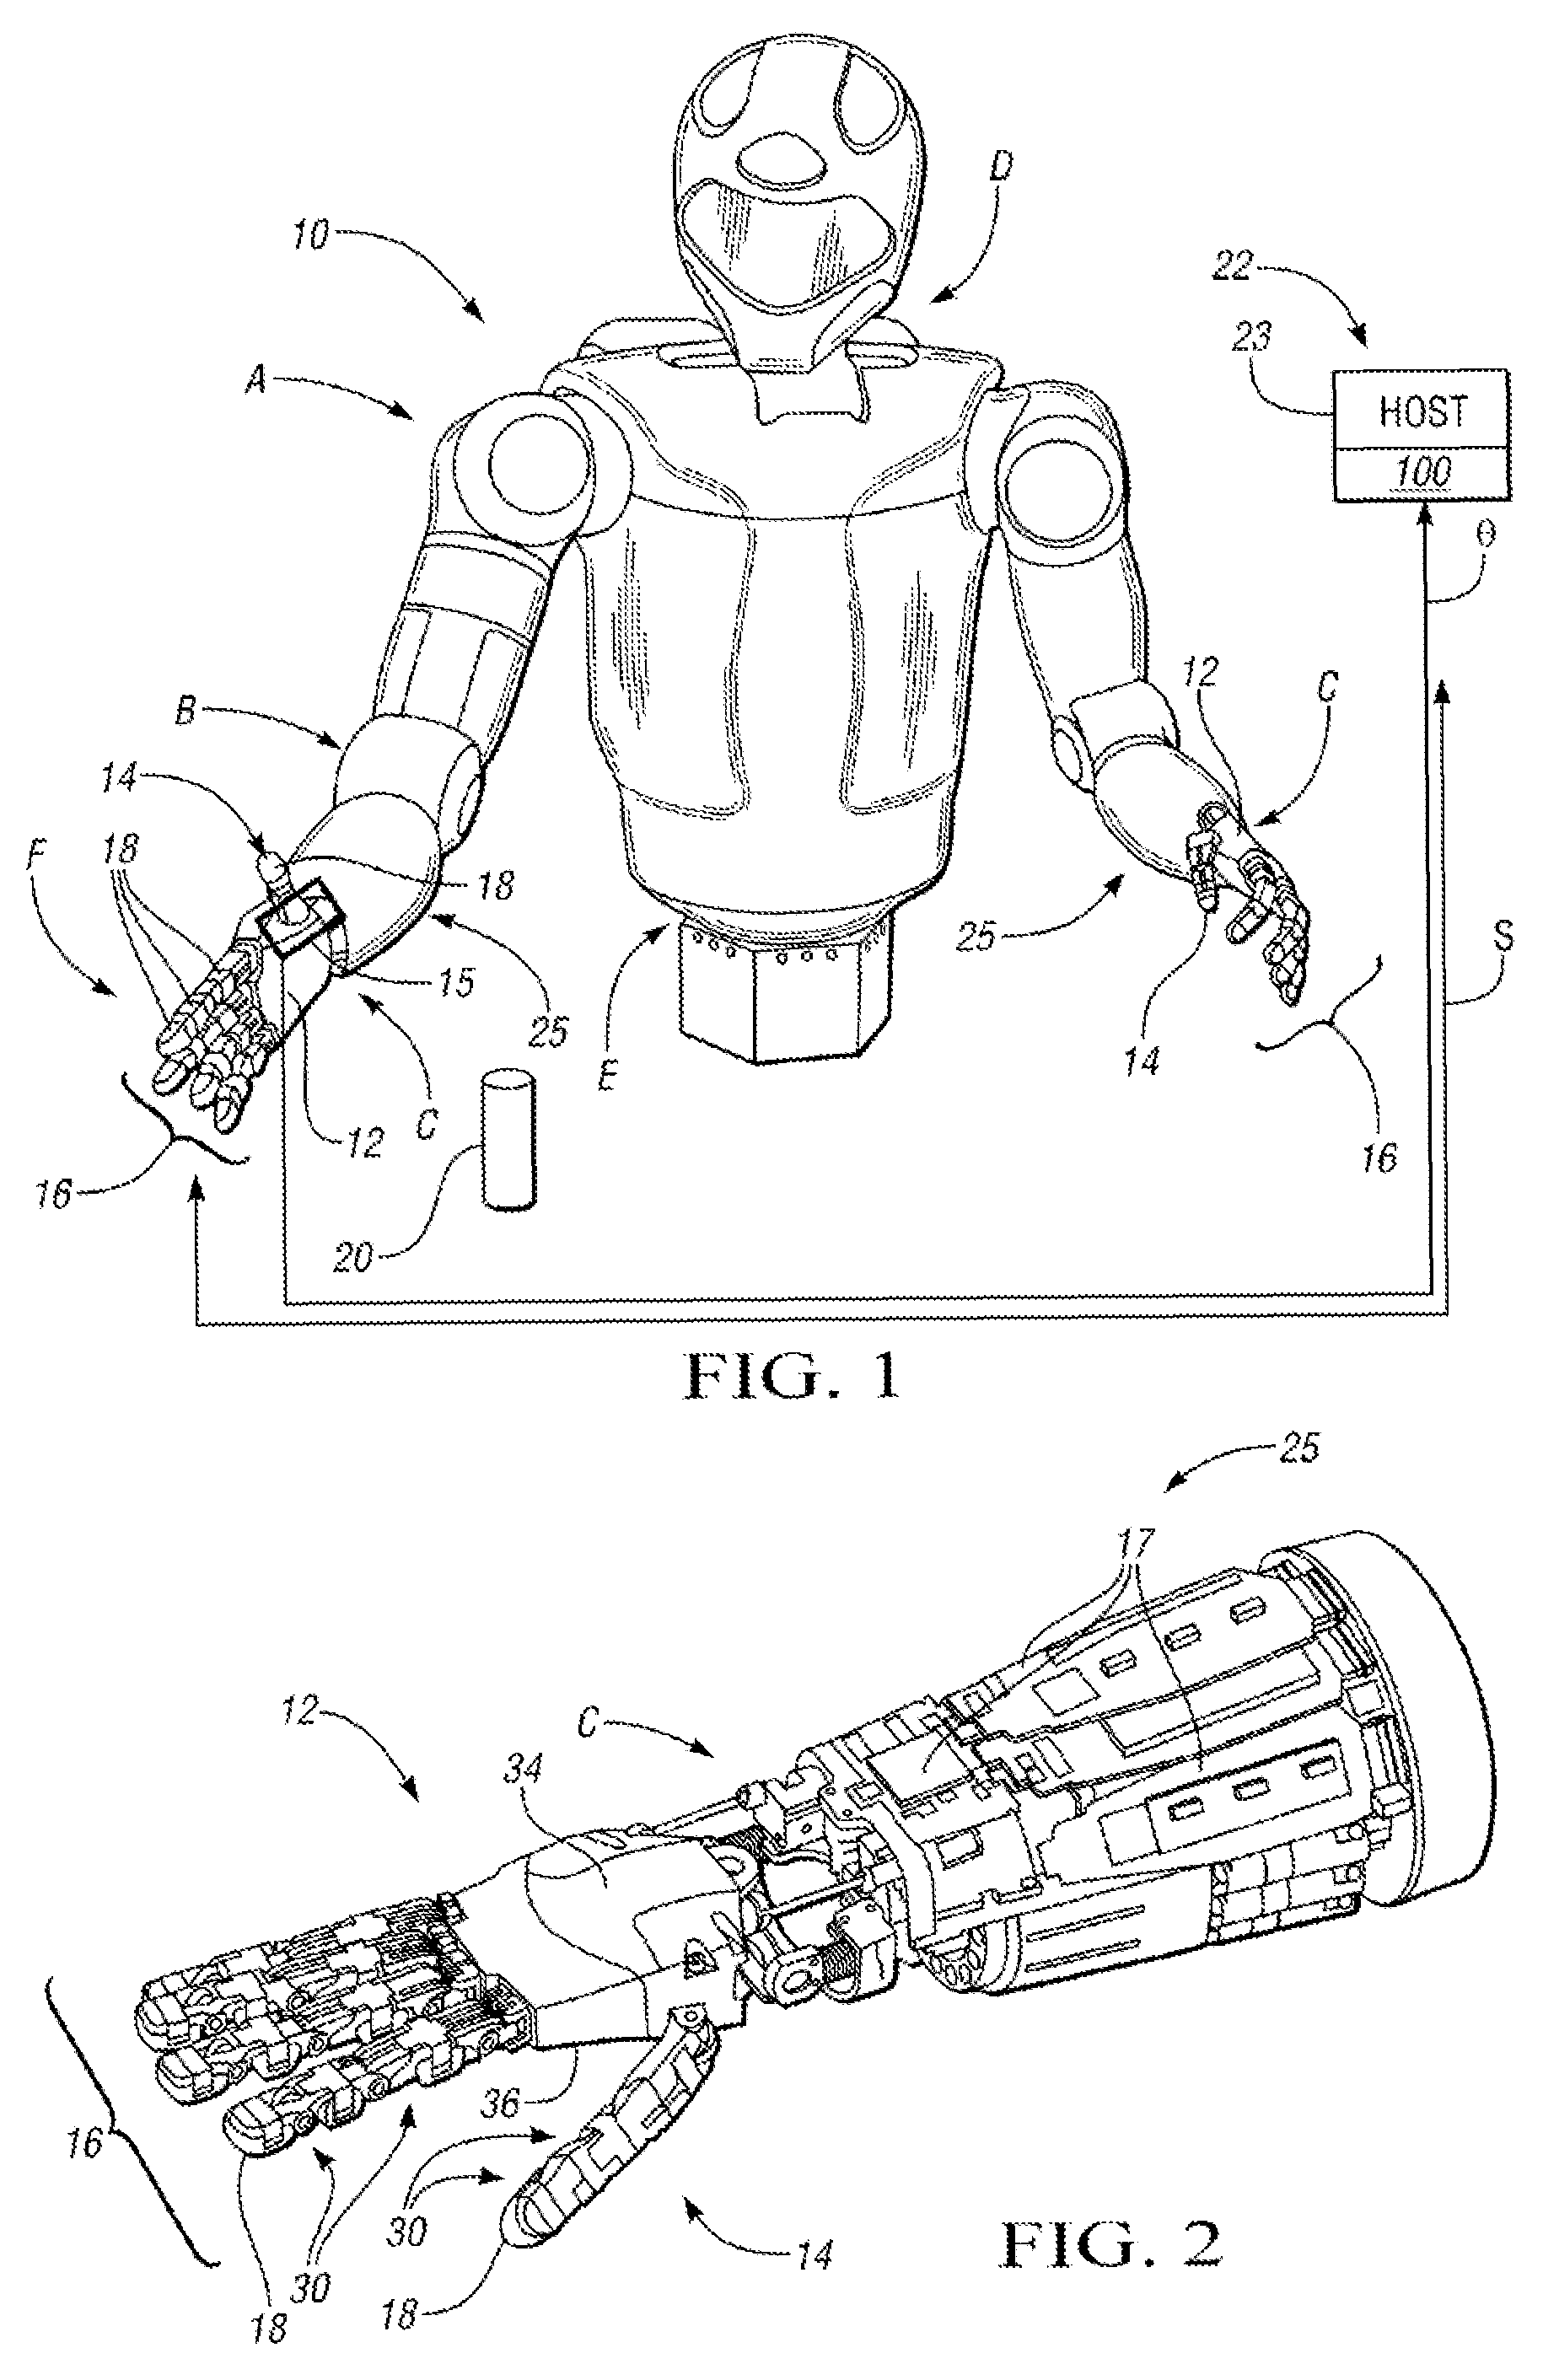 Method and apparatus for calibrating multi-axis load cells in a dexterous robot